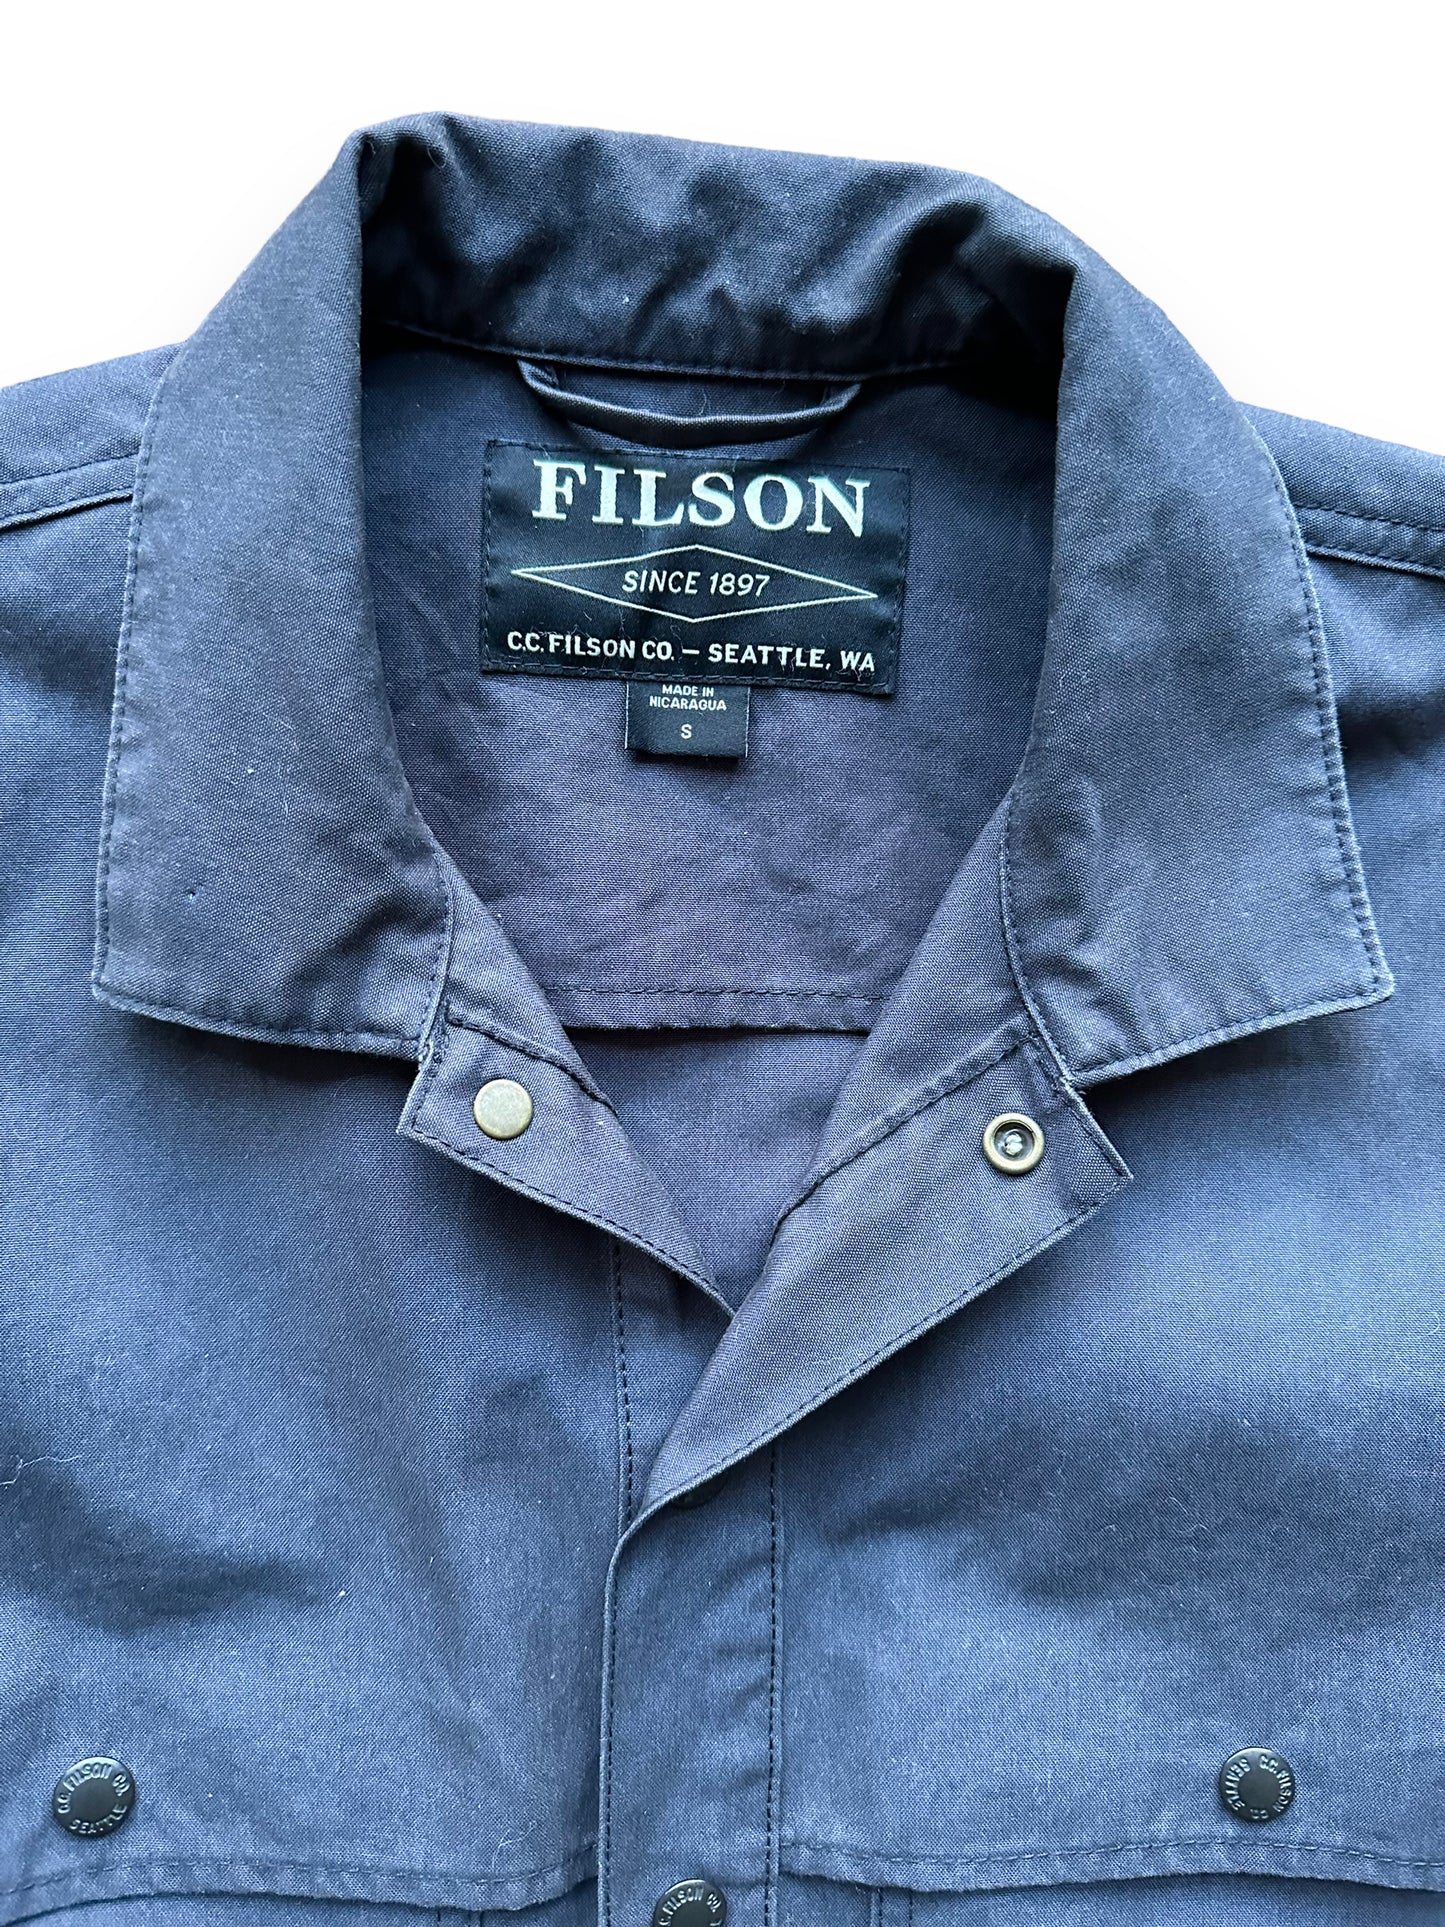 Collar/Tag View of Filson Midnight Navy Cruiser SZ S |  Barn Owl Vintage Goods | Filson Bargain Outlet Seattle